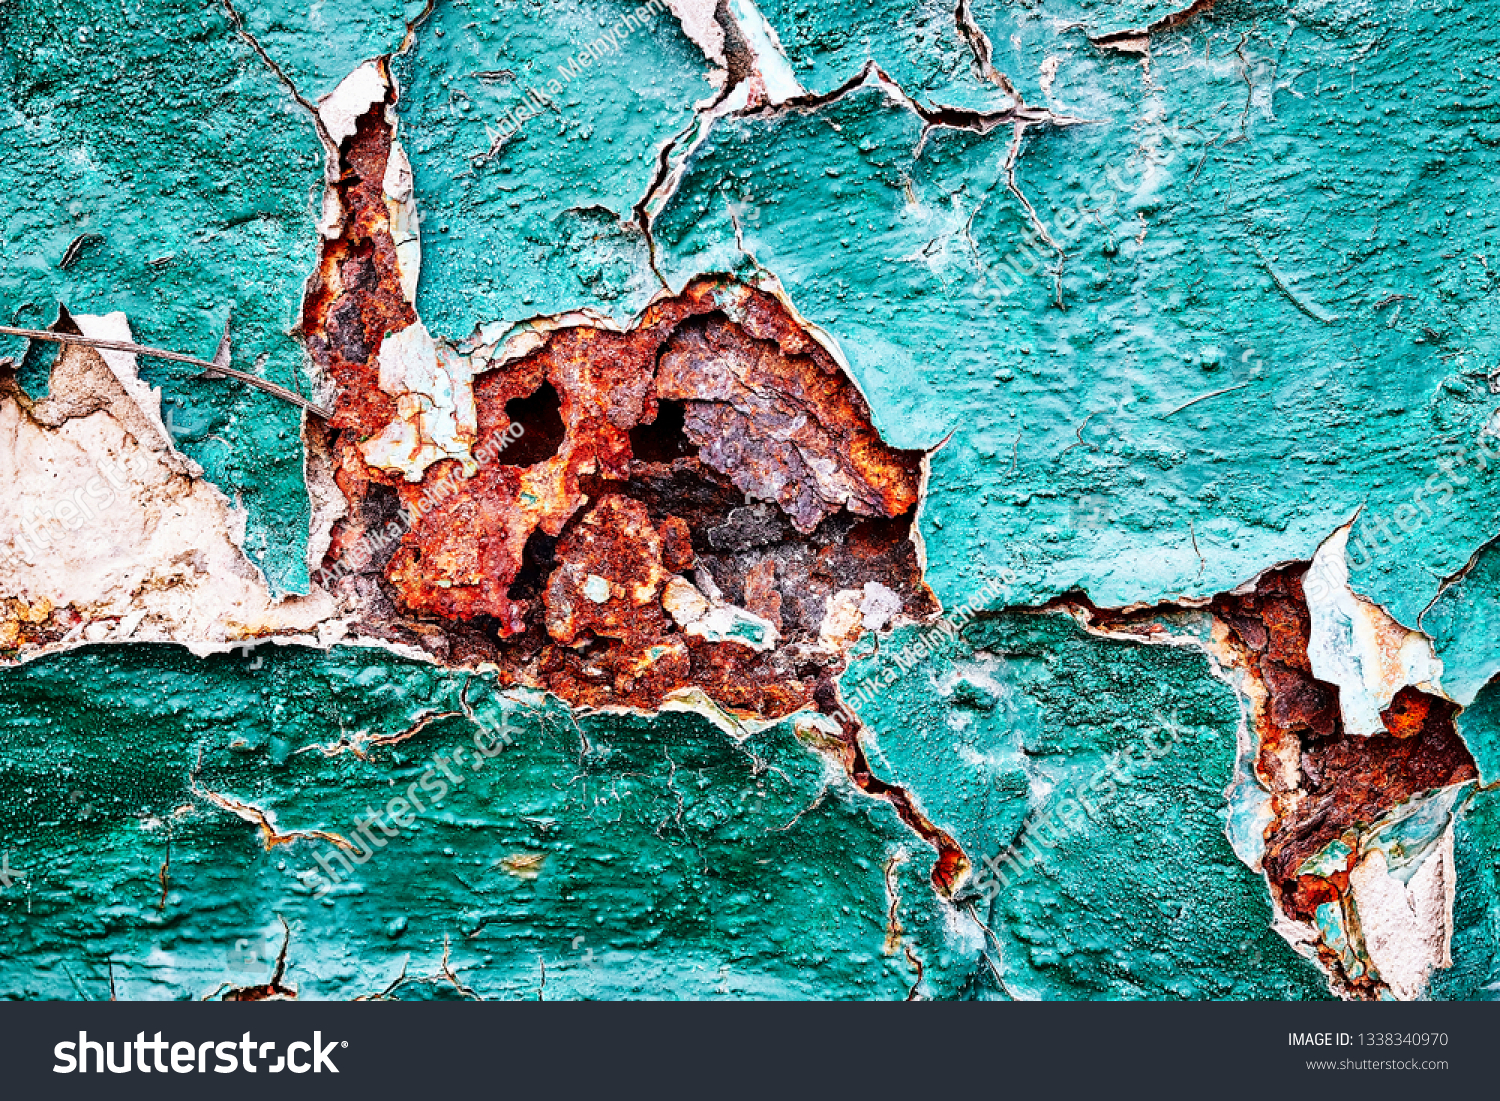 Background texture relief structure age-related changes in metal corrosion chipped cracks cracking rust pieces peeling erosion peeling green paint with white and red inserts wall surface large fragmen #1338340970